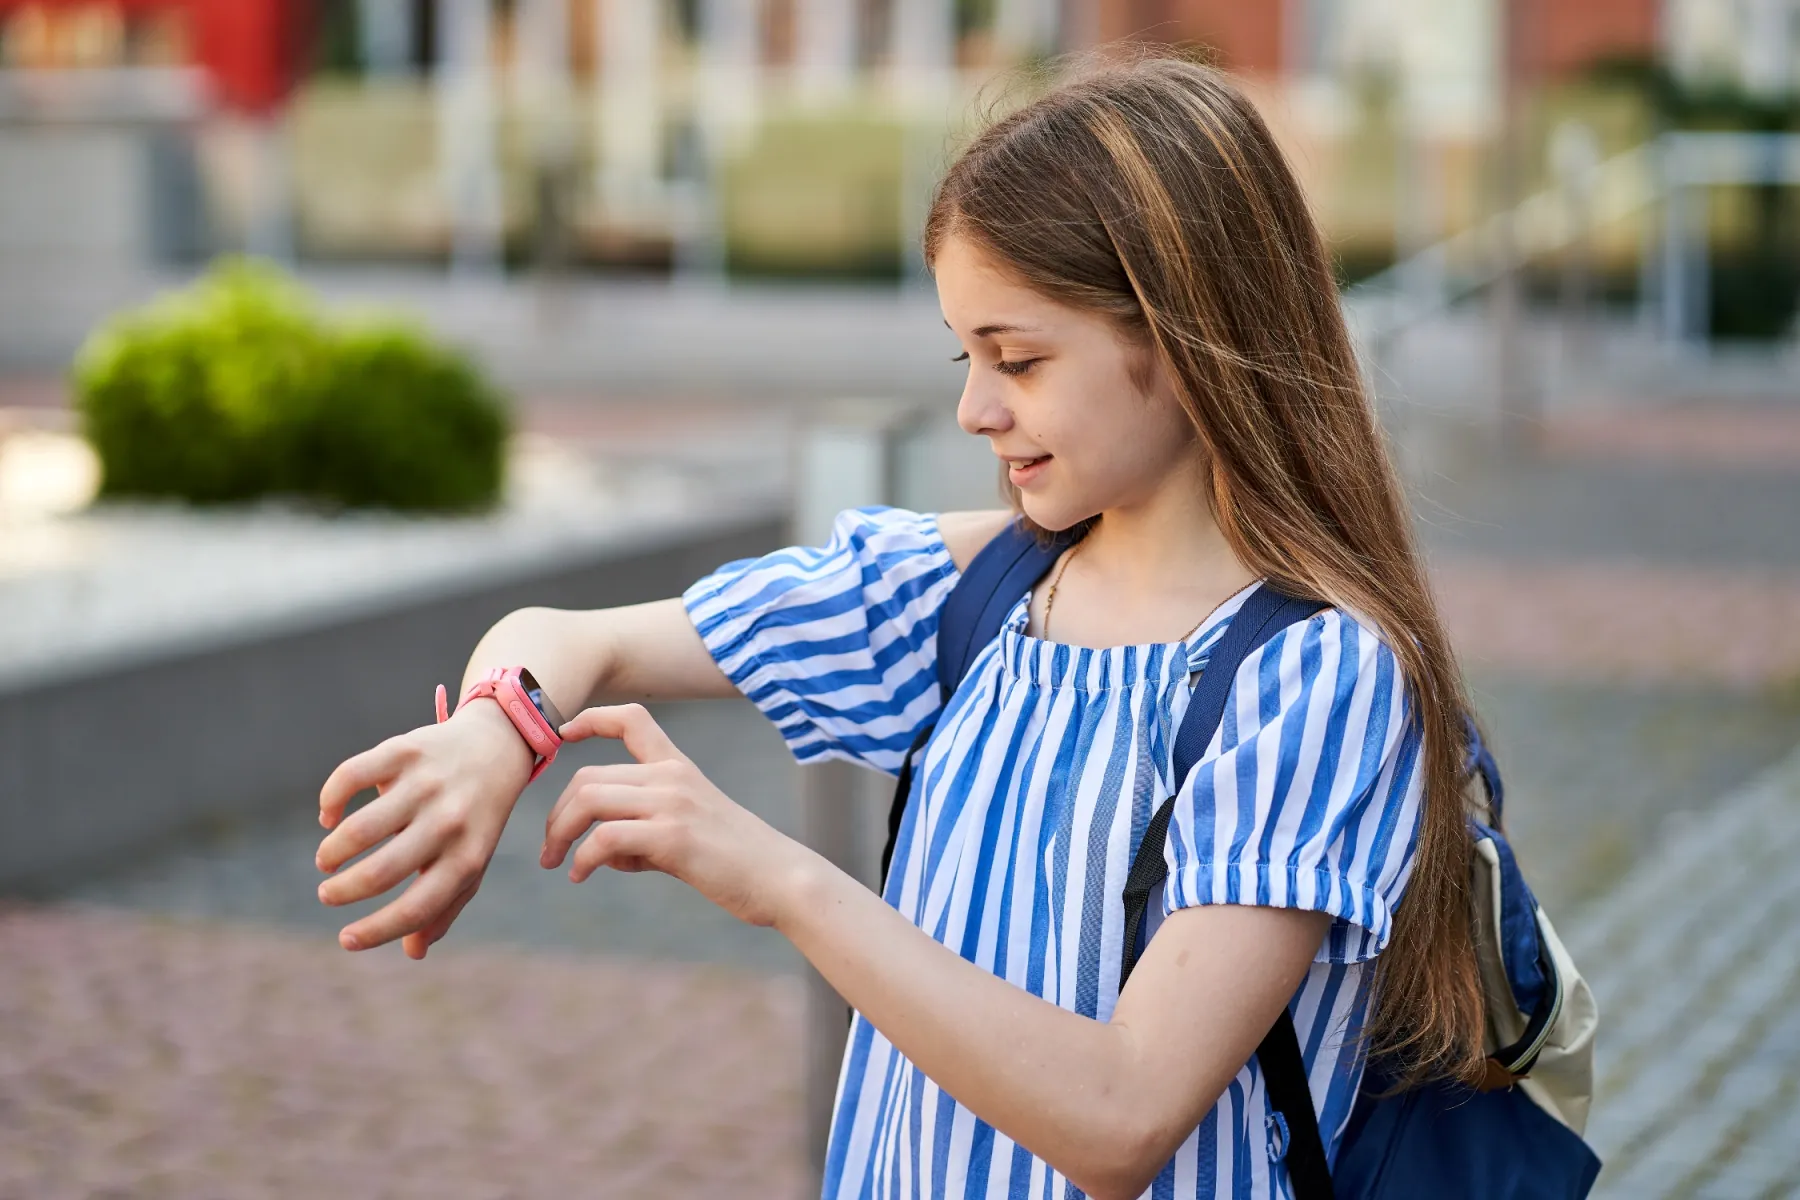 Different Ways to Track Your Child with GPS